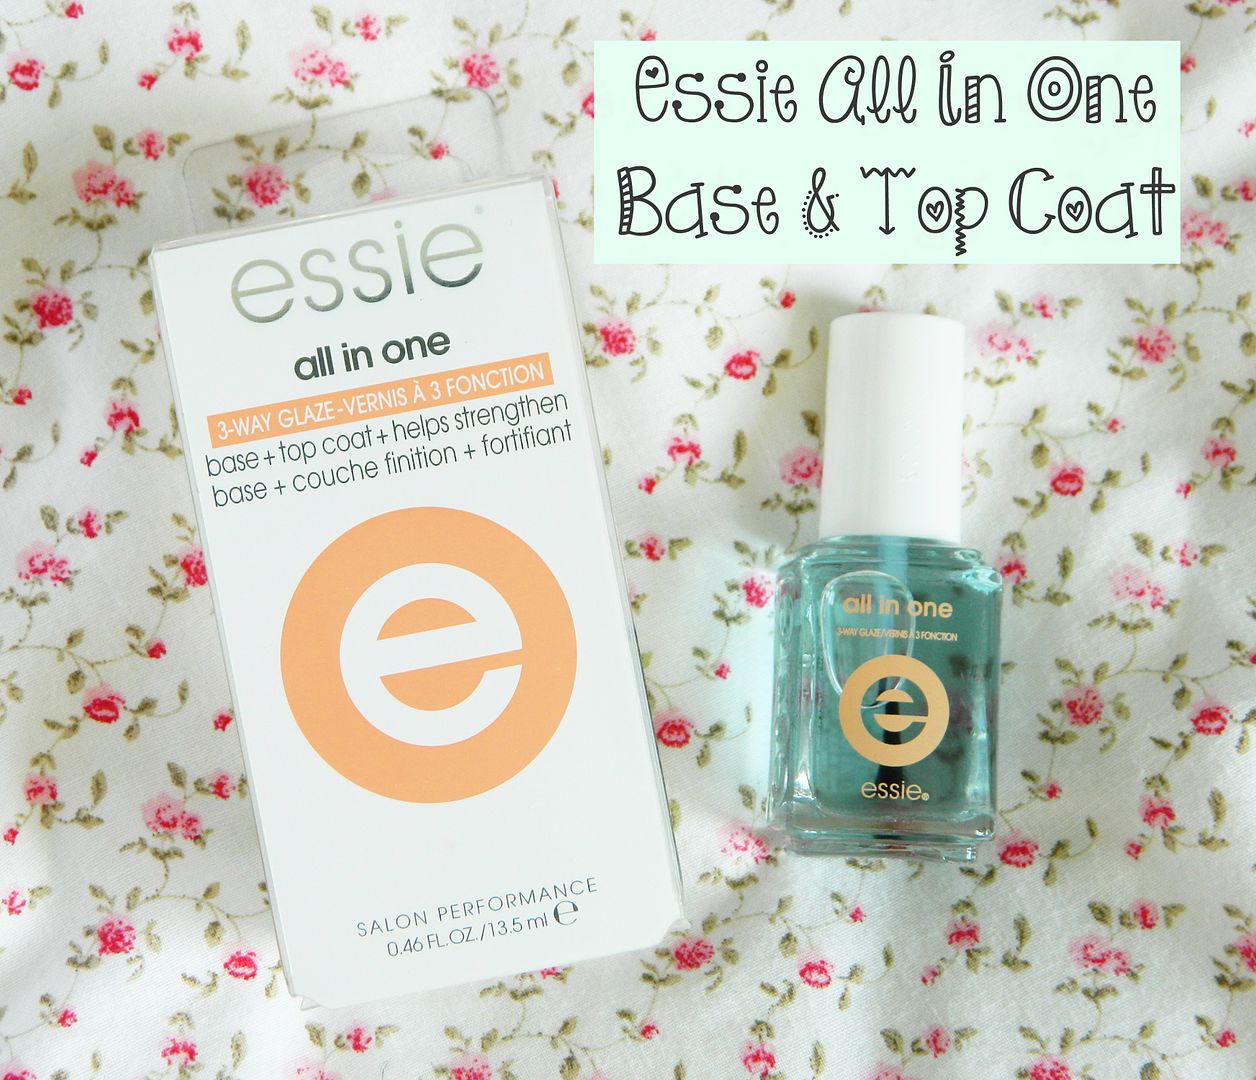 TK Maxx Beauty Bargains Essie All In One Base Top Coat Nail Strengthener Haul Belle Amie UK Beauty Fashion Lifestyle Blog